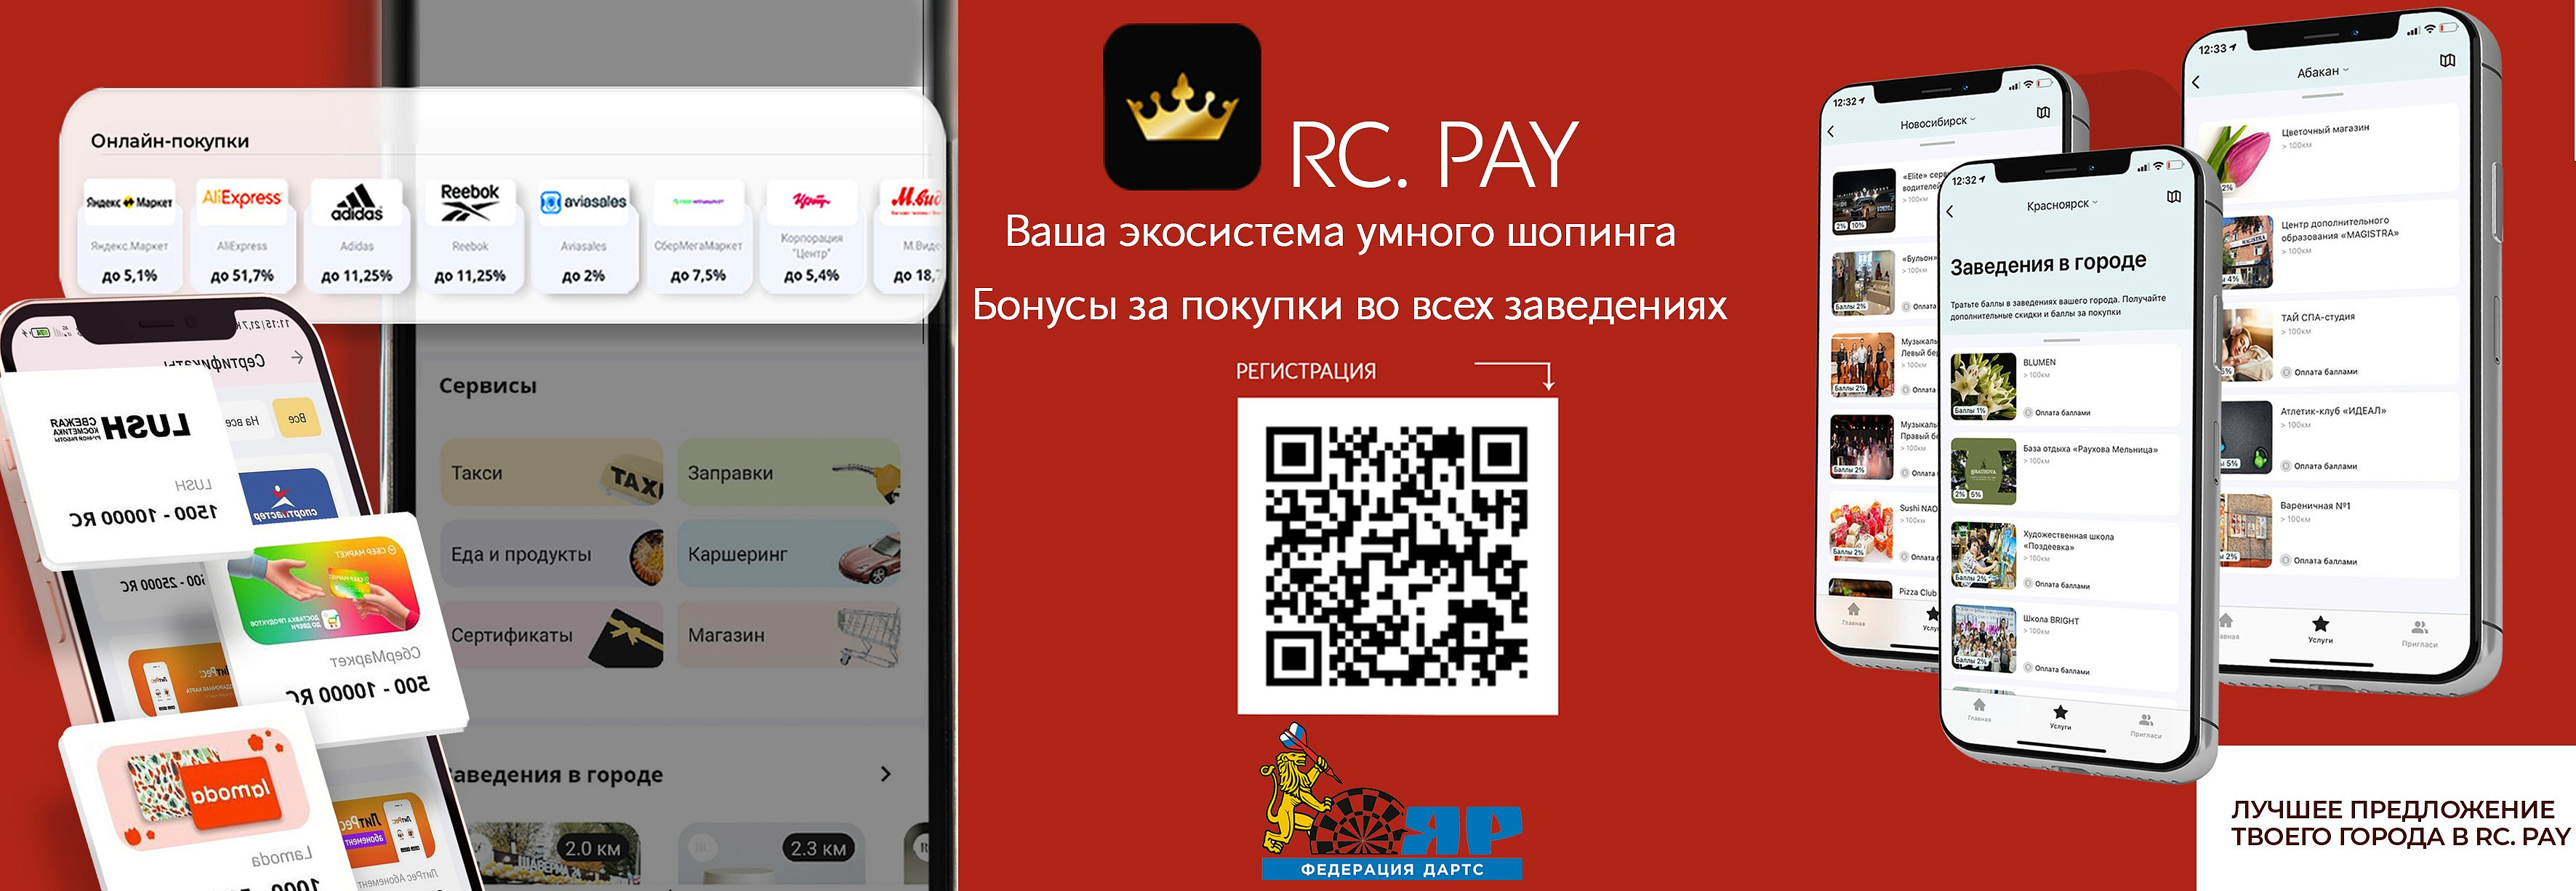 RC/PAY Дартс ЯР